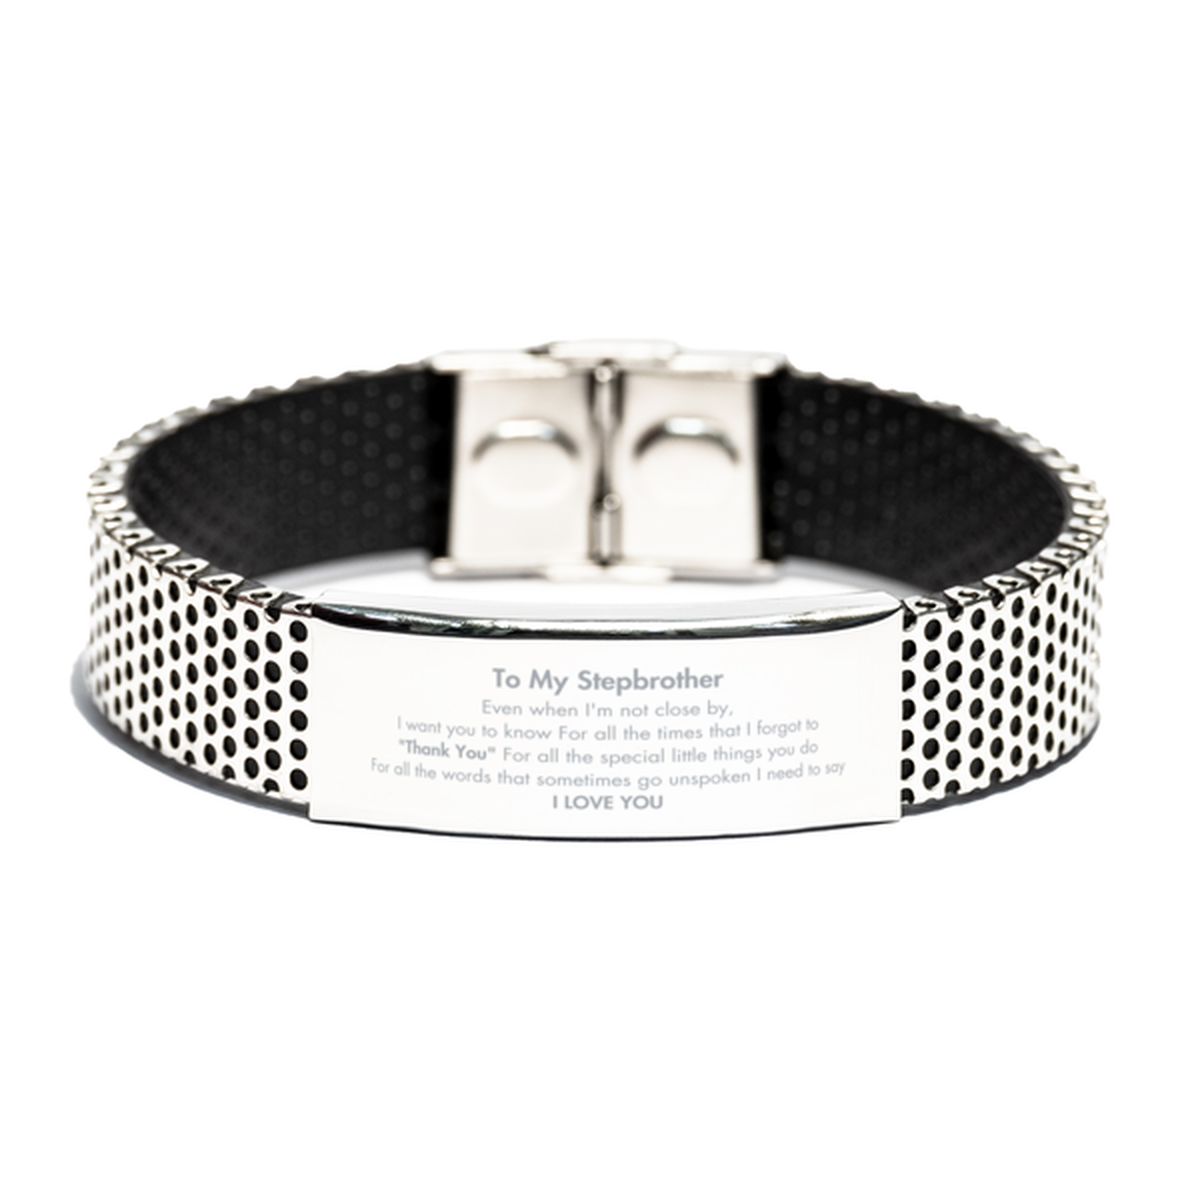 Thank You Gifts for Stepbrother, Keepsake Stainless Steel Bracelet Gifts for Stepbrother Birthday Mother's day Father's Day Stepbrother For all the words That sometimes go unspoken I need to say I LOVE YOU